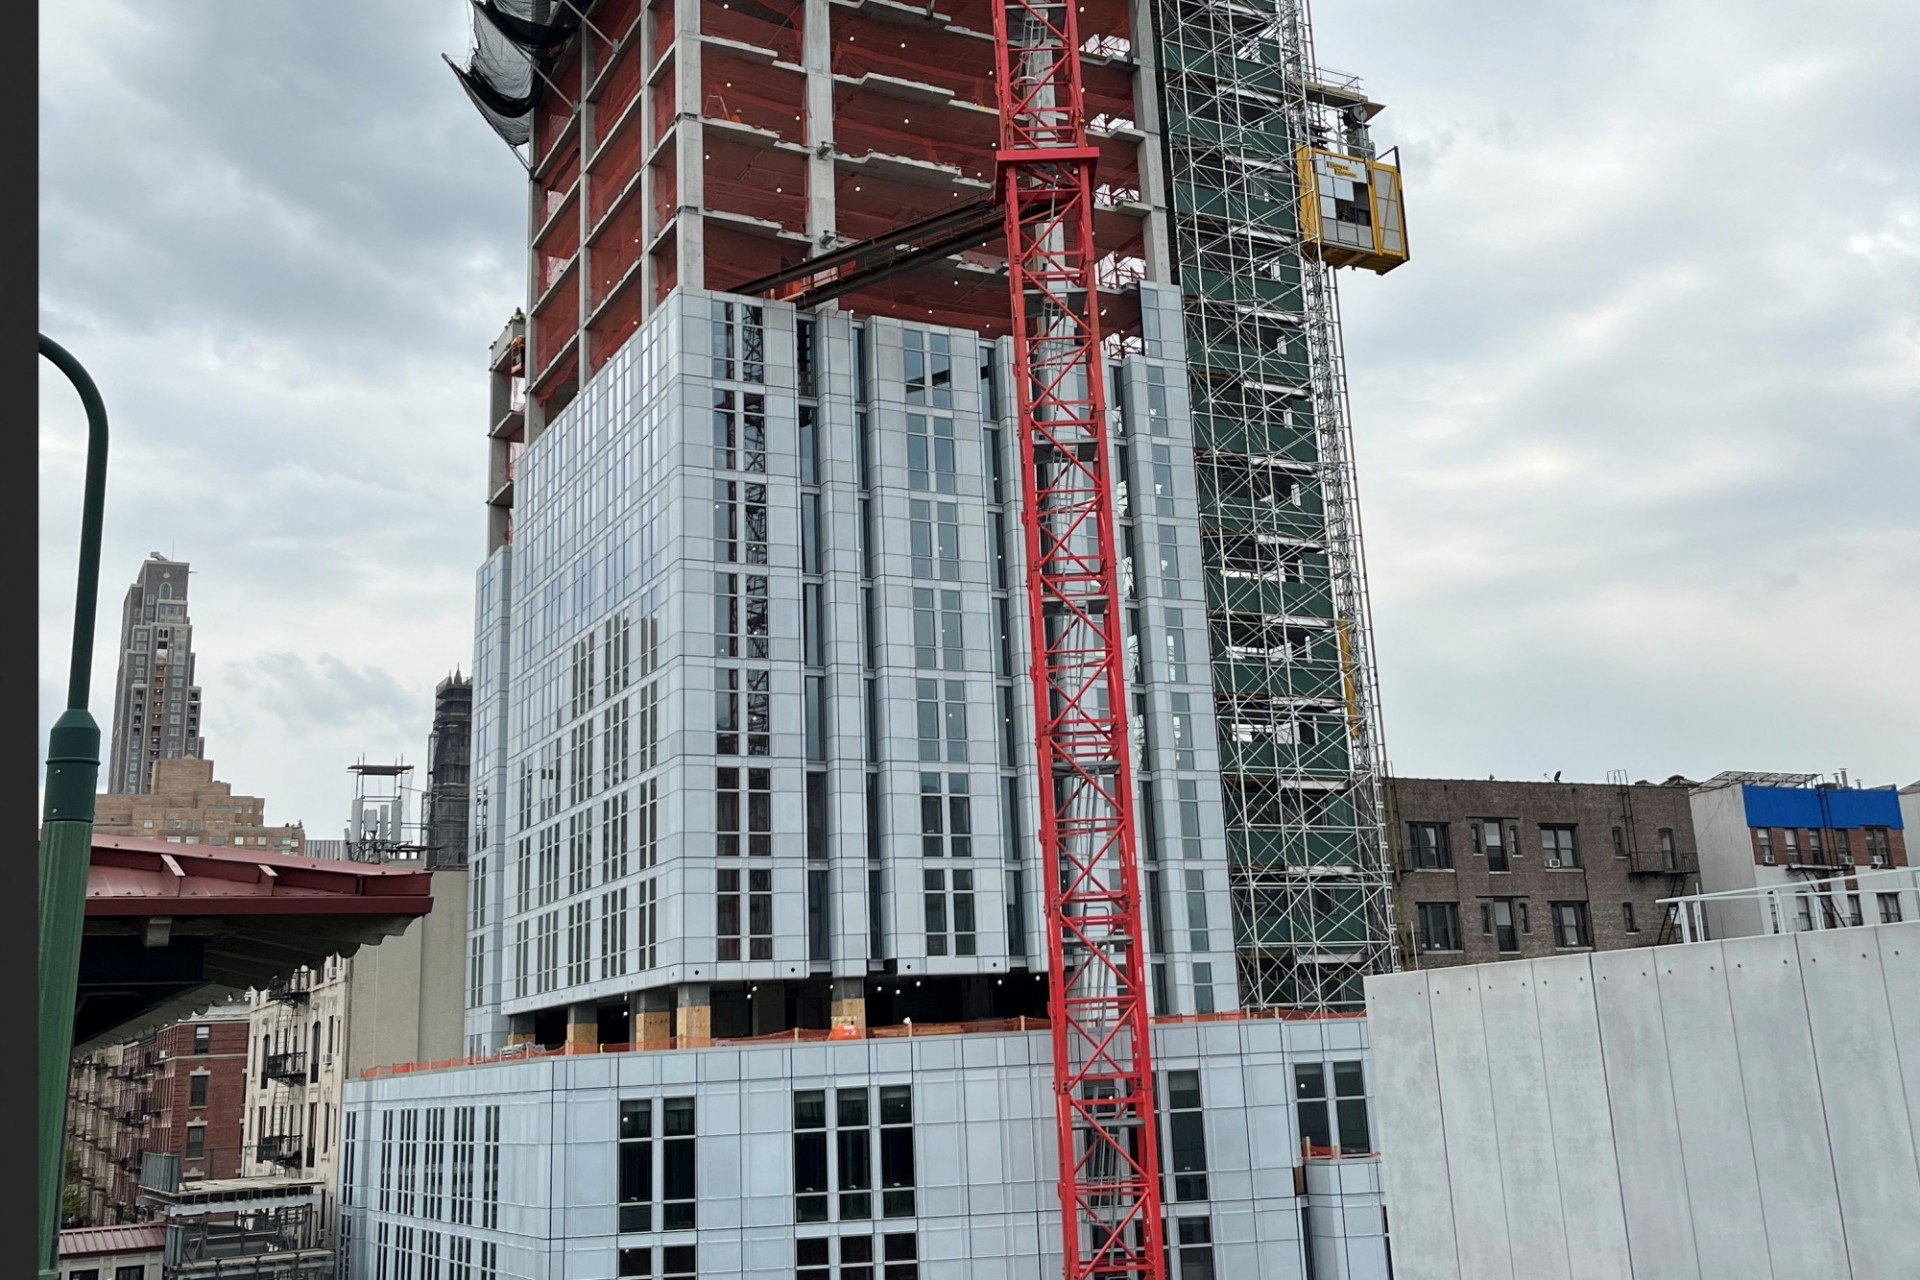 A view of the 600 W. 125th Street construction site which is 28 floors high, and has some facade panels installed around it. 